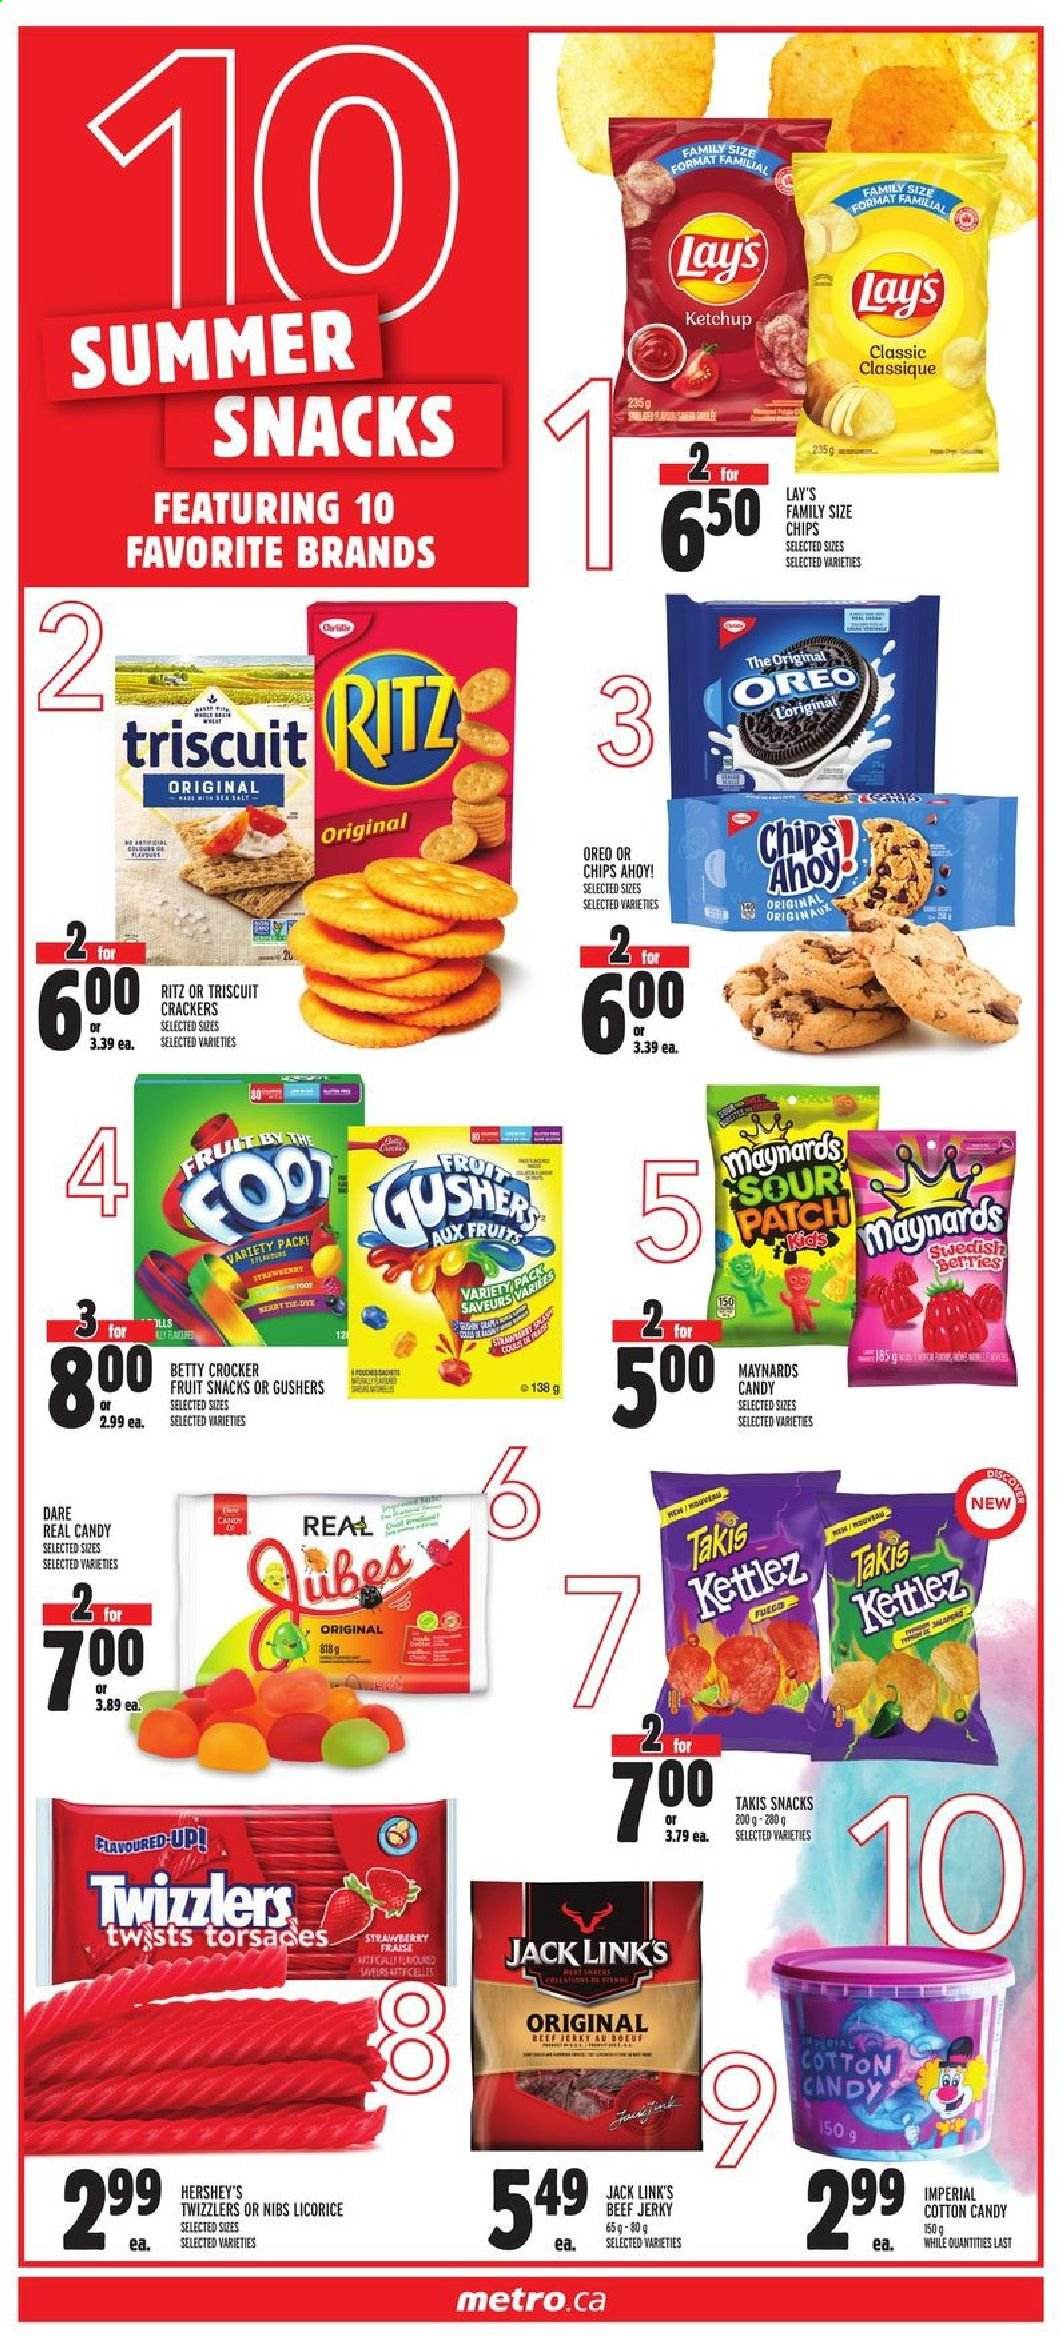 thumbnail - Metro Flyer - May 27, 2021 - June 02, 2021 - Sales products - beef jerky, jerky, Hershey's, cotton candy, crackers, fruit snack, Chips Ahoy!, sour patch, RITZ, Lay’s, Jack Link's, Dial, chips. Page 6.